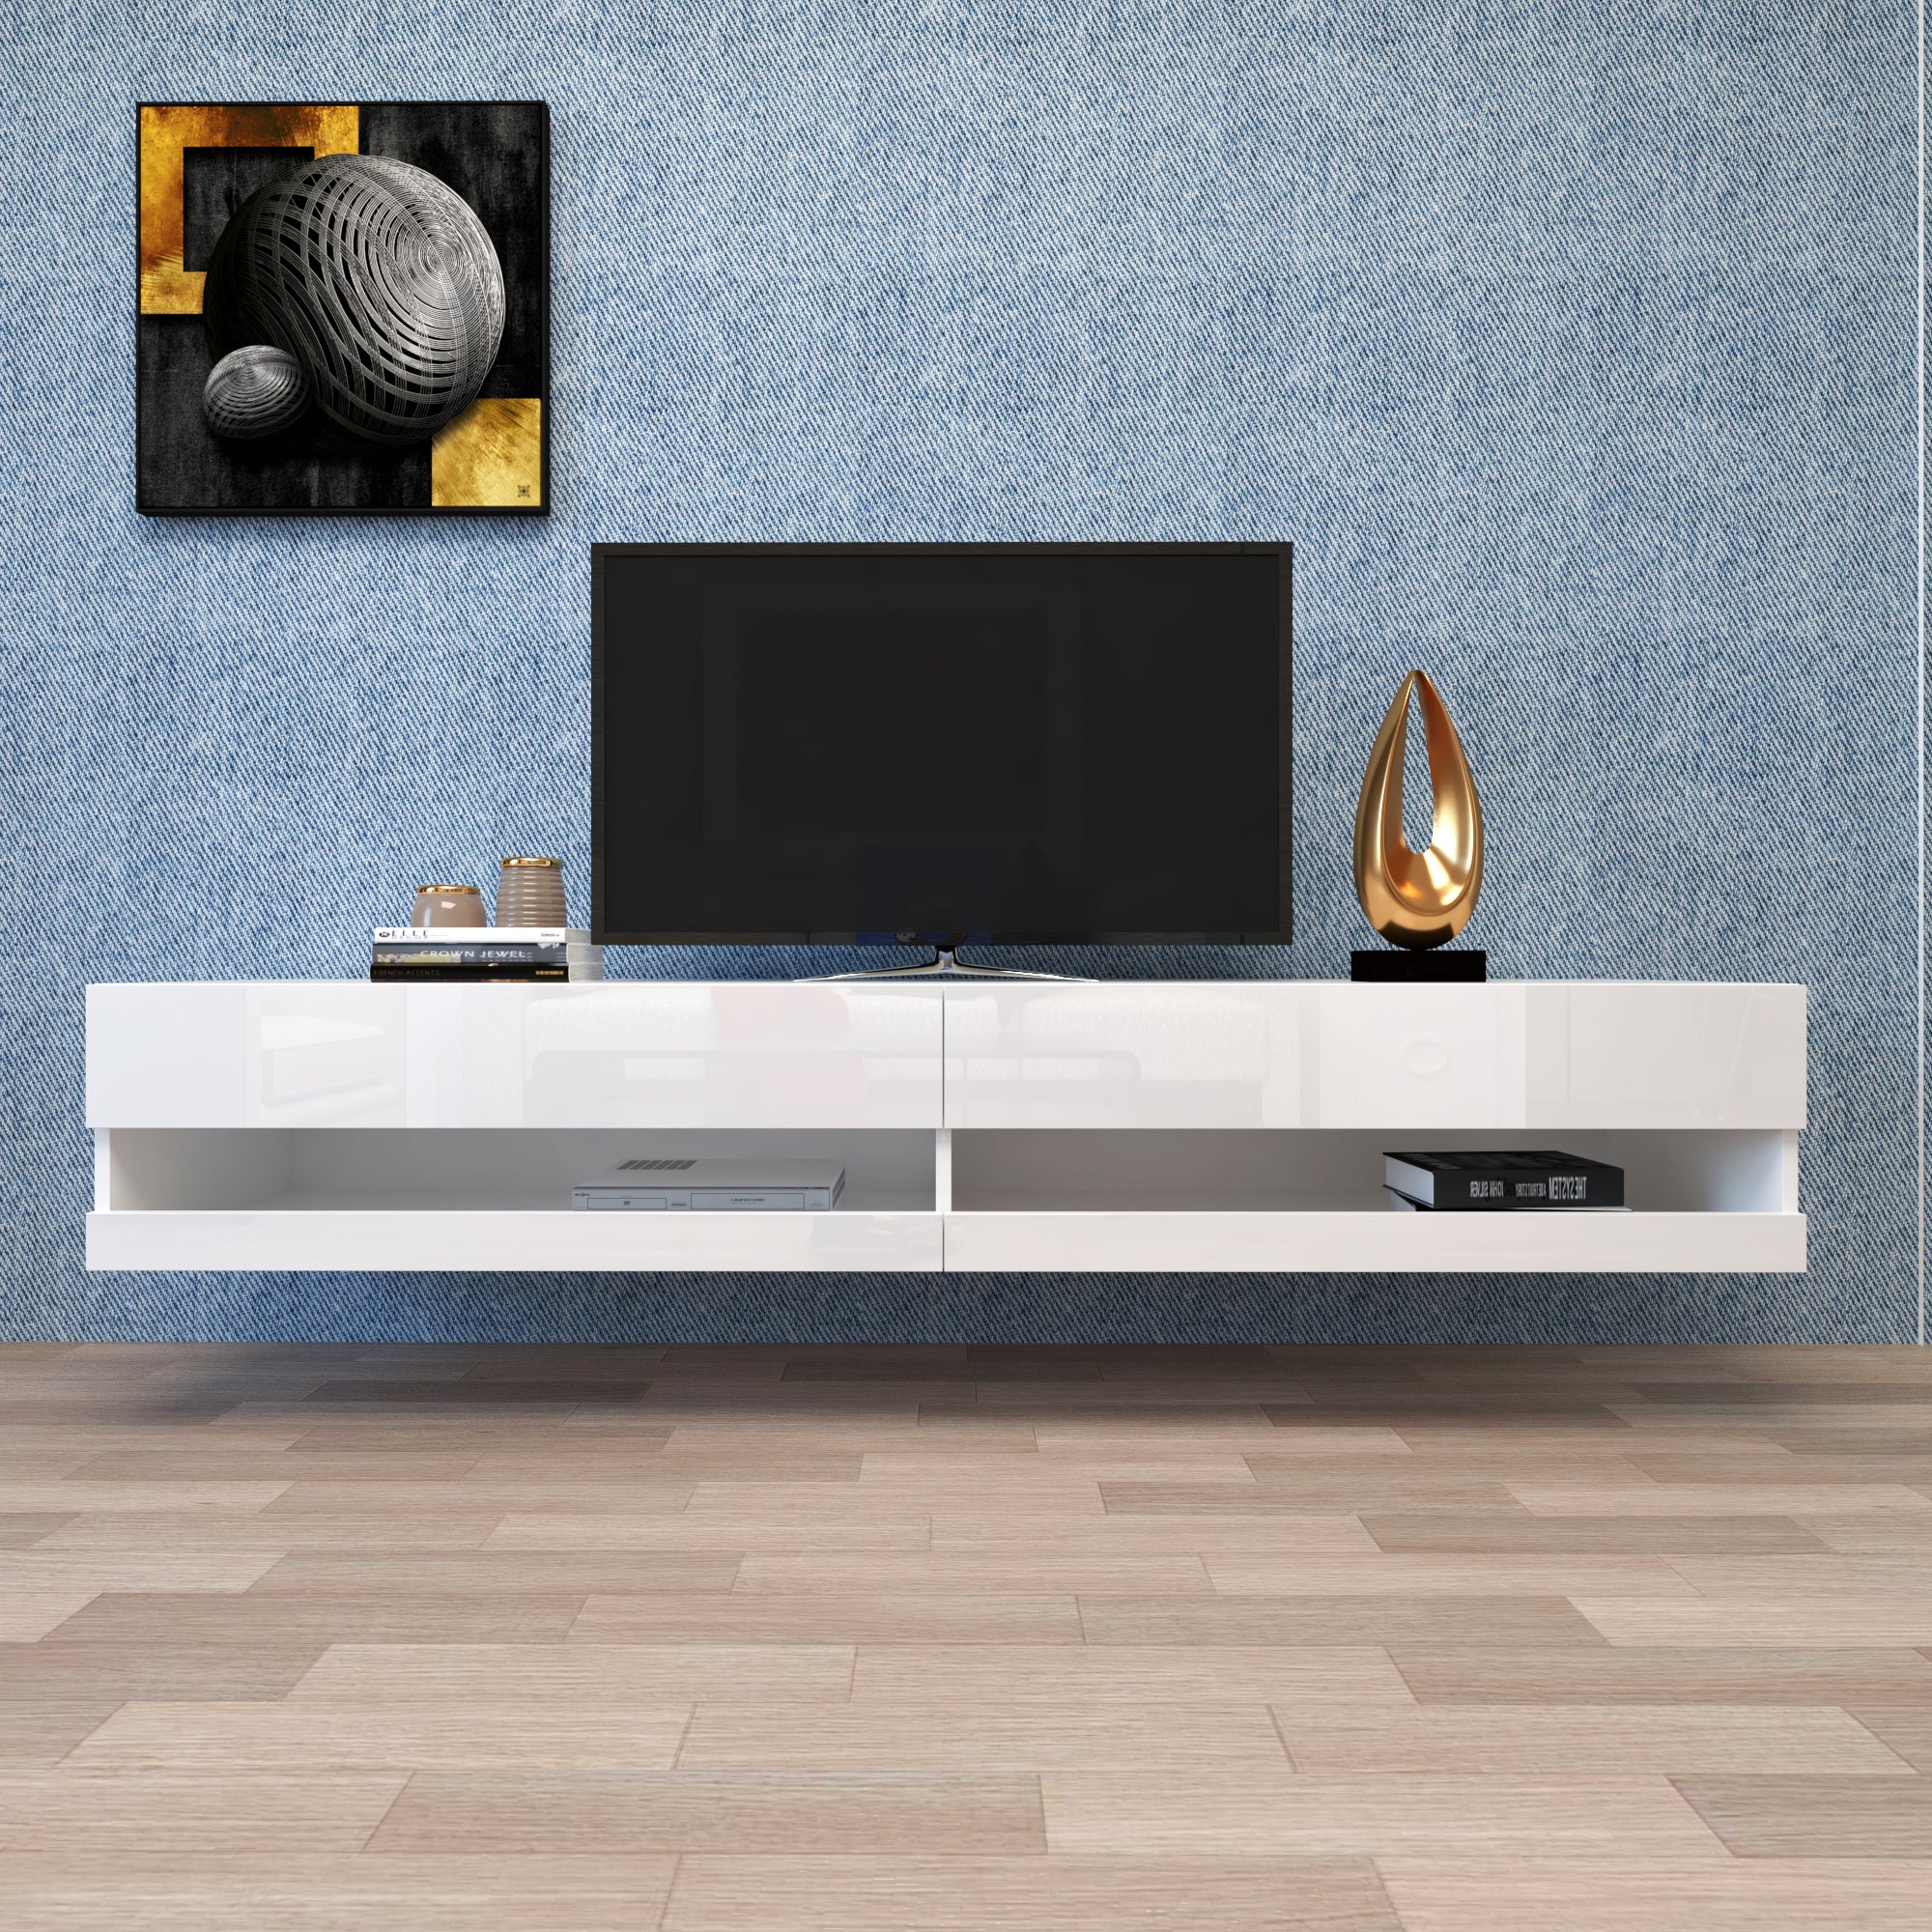 Modern TV Stand Entertainment Center with 20 Color Algeria